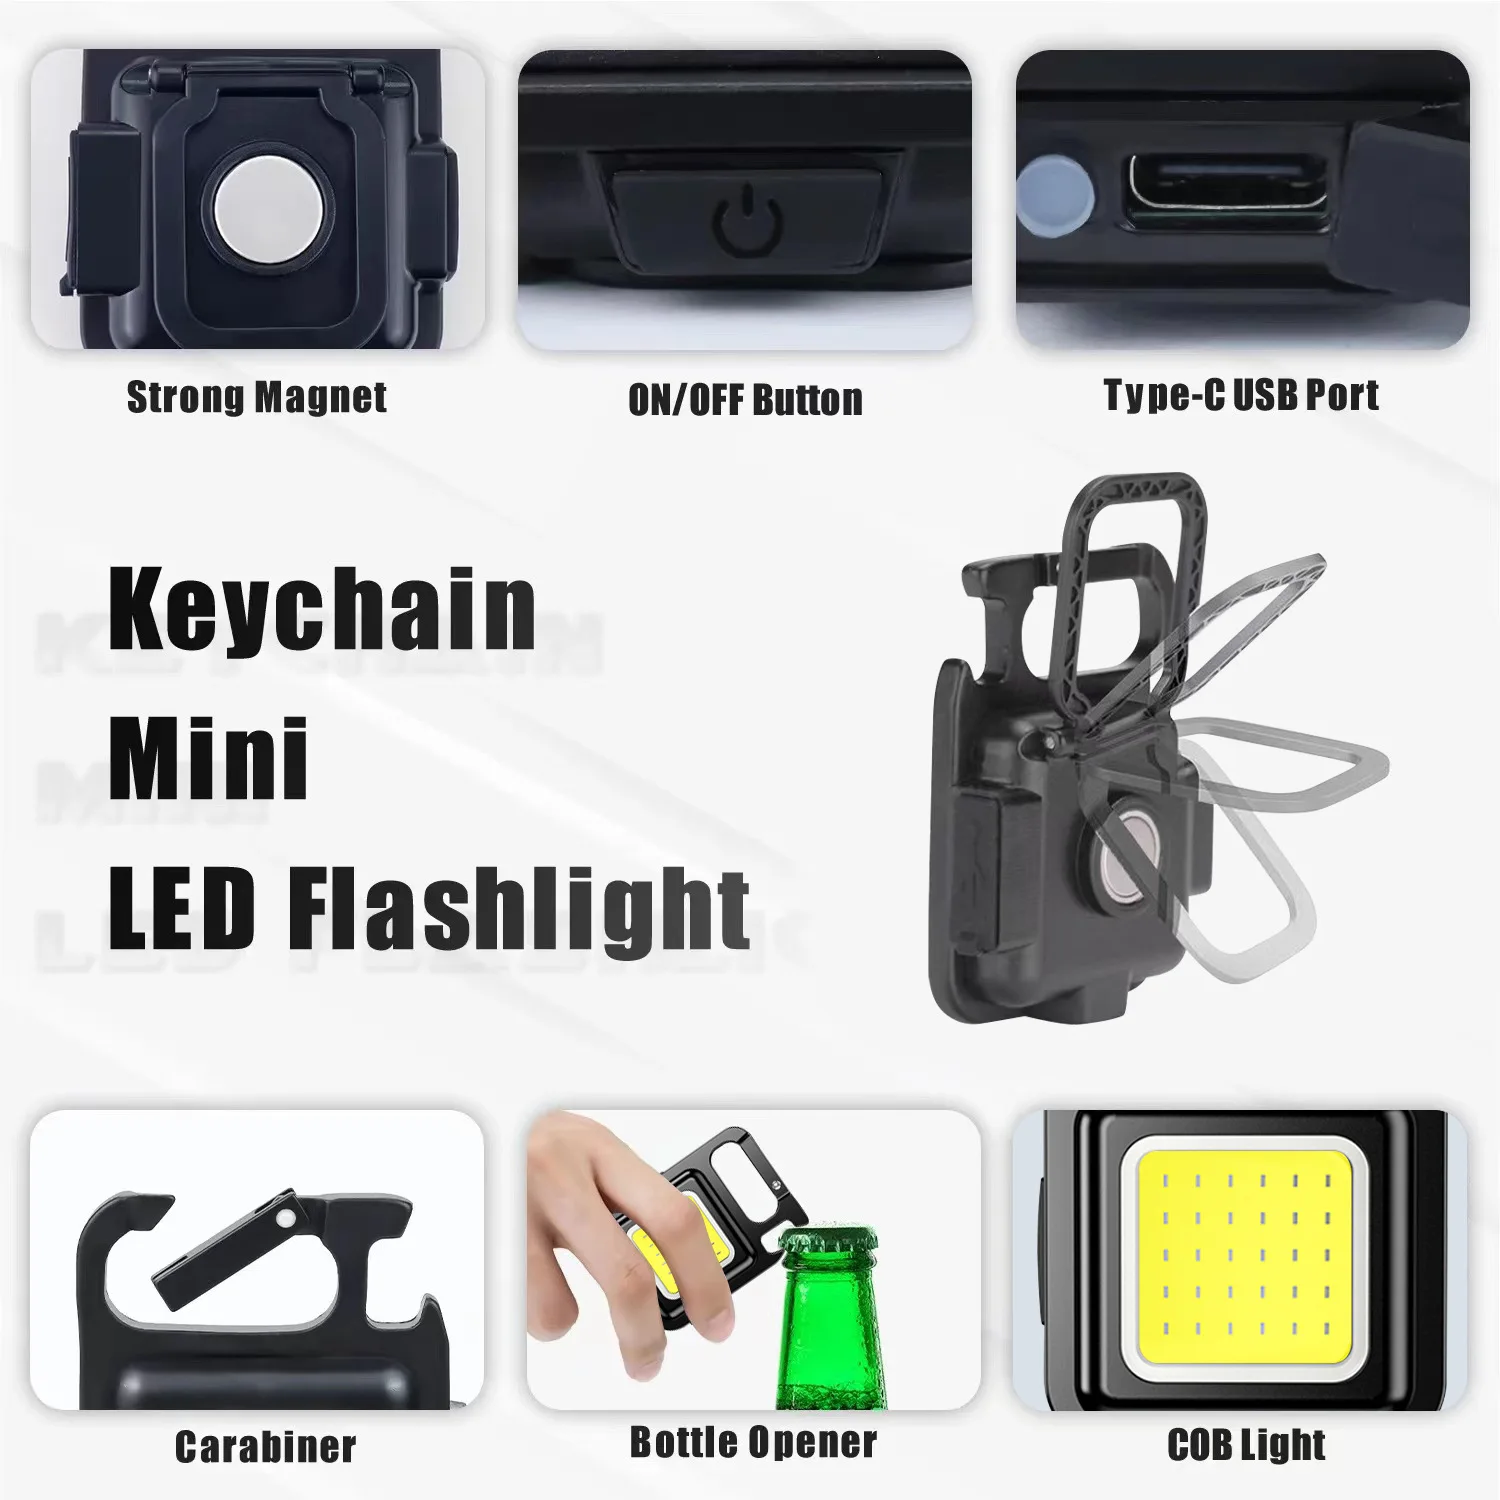 Portable Pocket Flashlight Keychains Work Light USB Rechargeable Camping Small Light Corkscrew Mini LED Flashlight For Outdoor